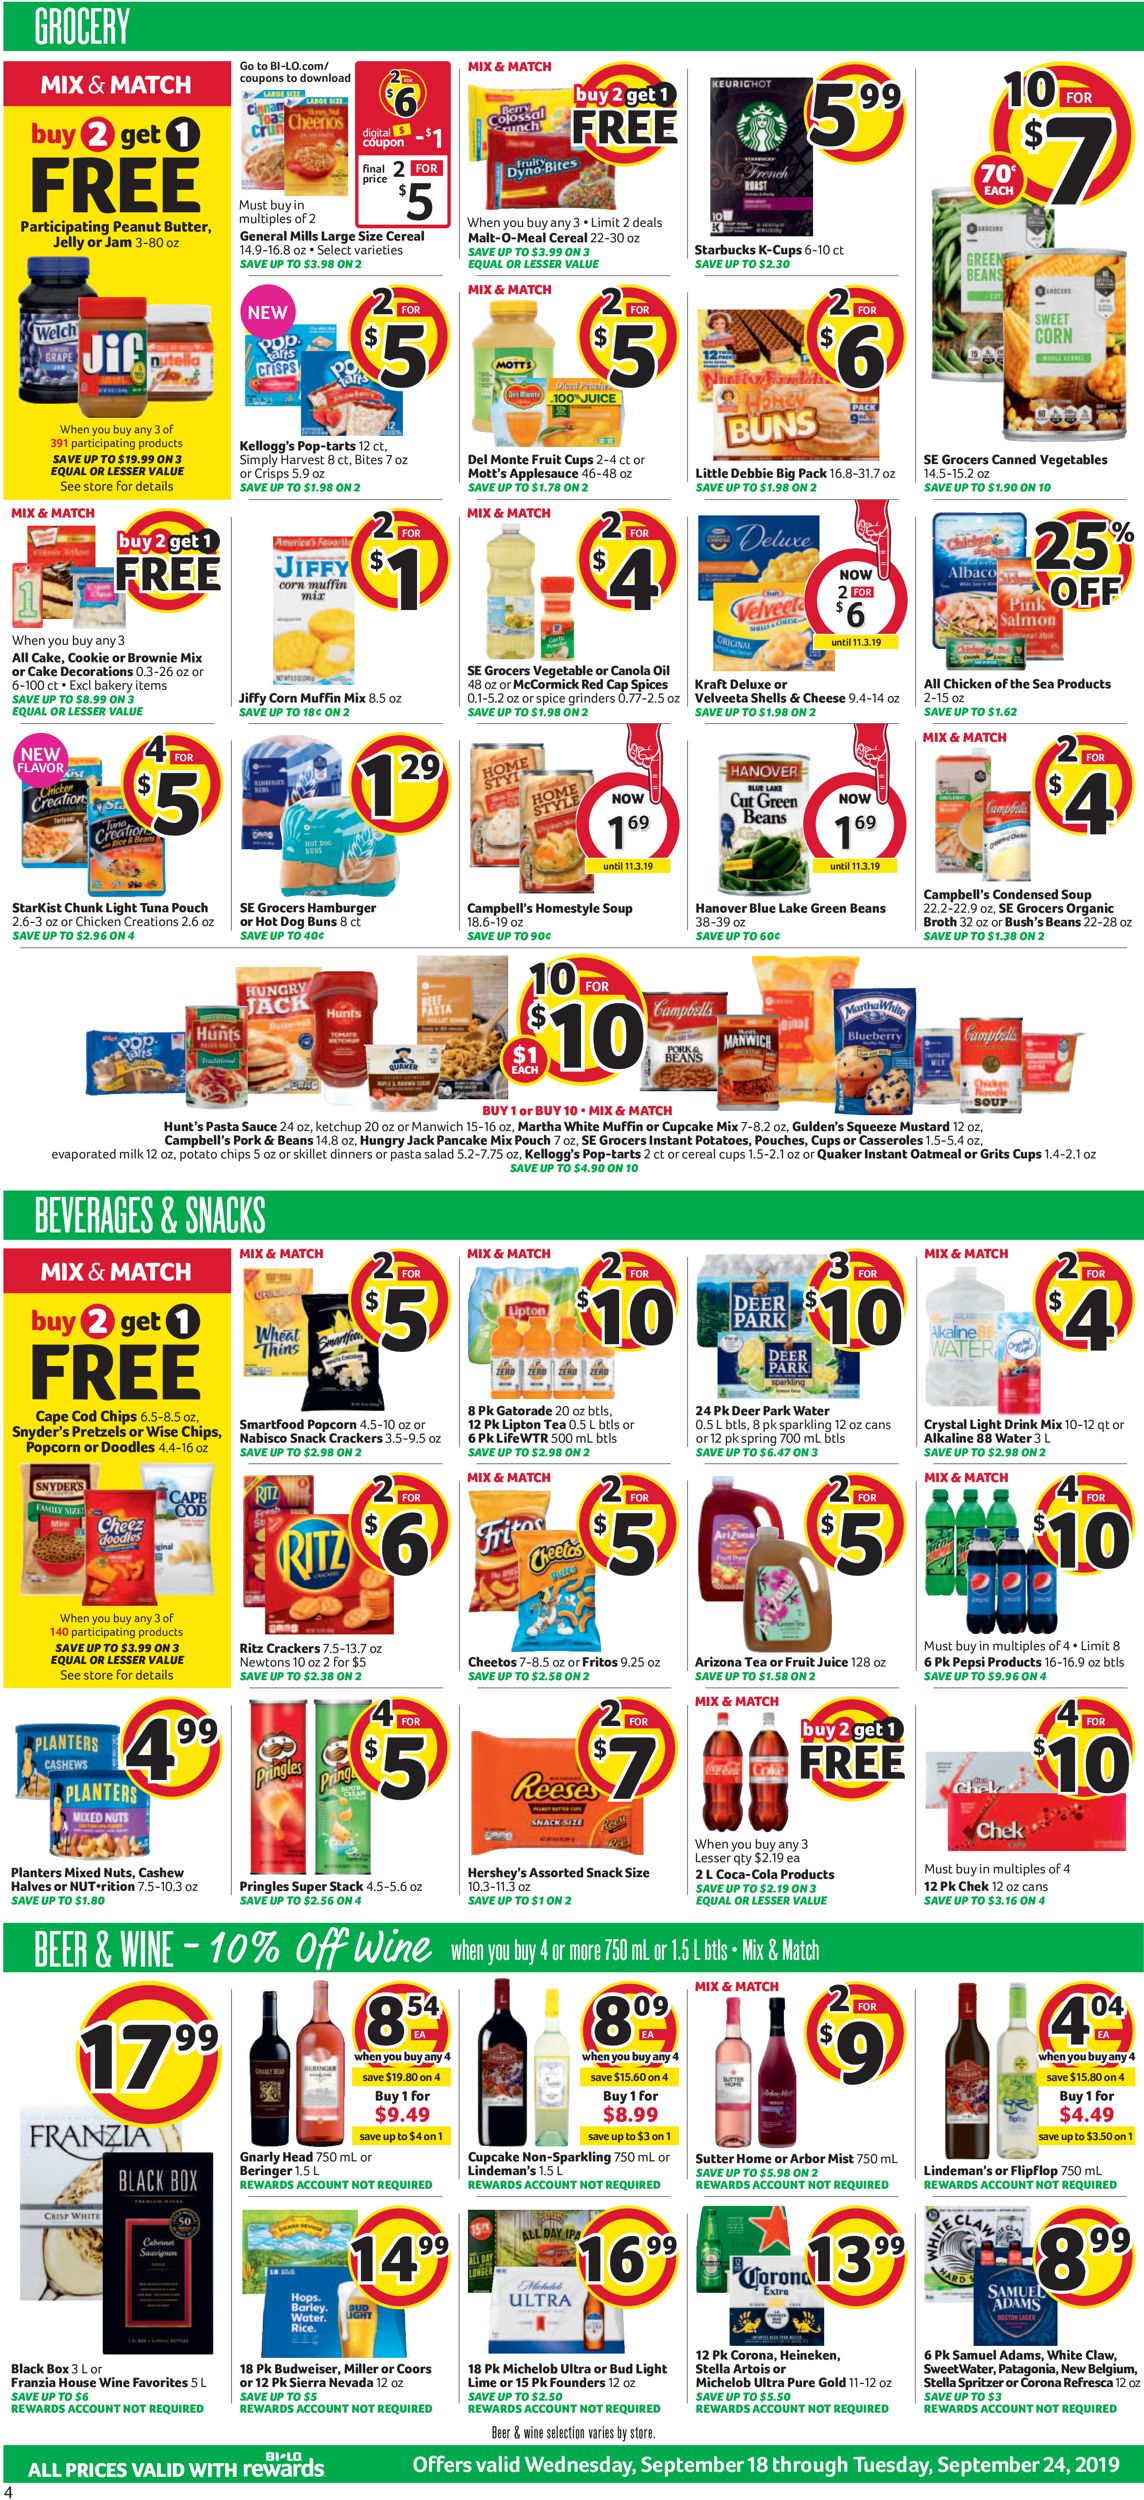 BI-LO Current weekly ad 09/18 - 09/24/2019 5 - frequent ...